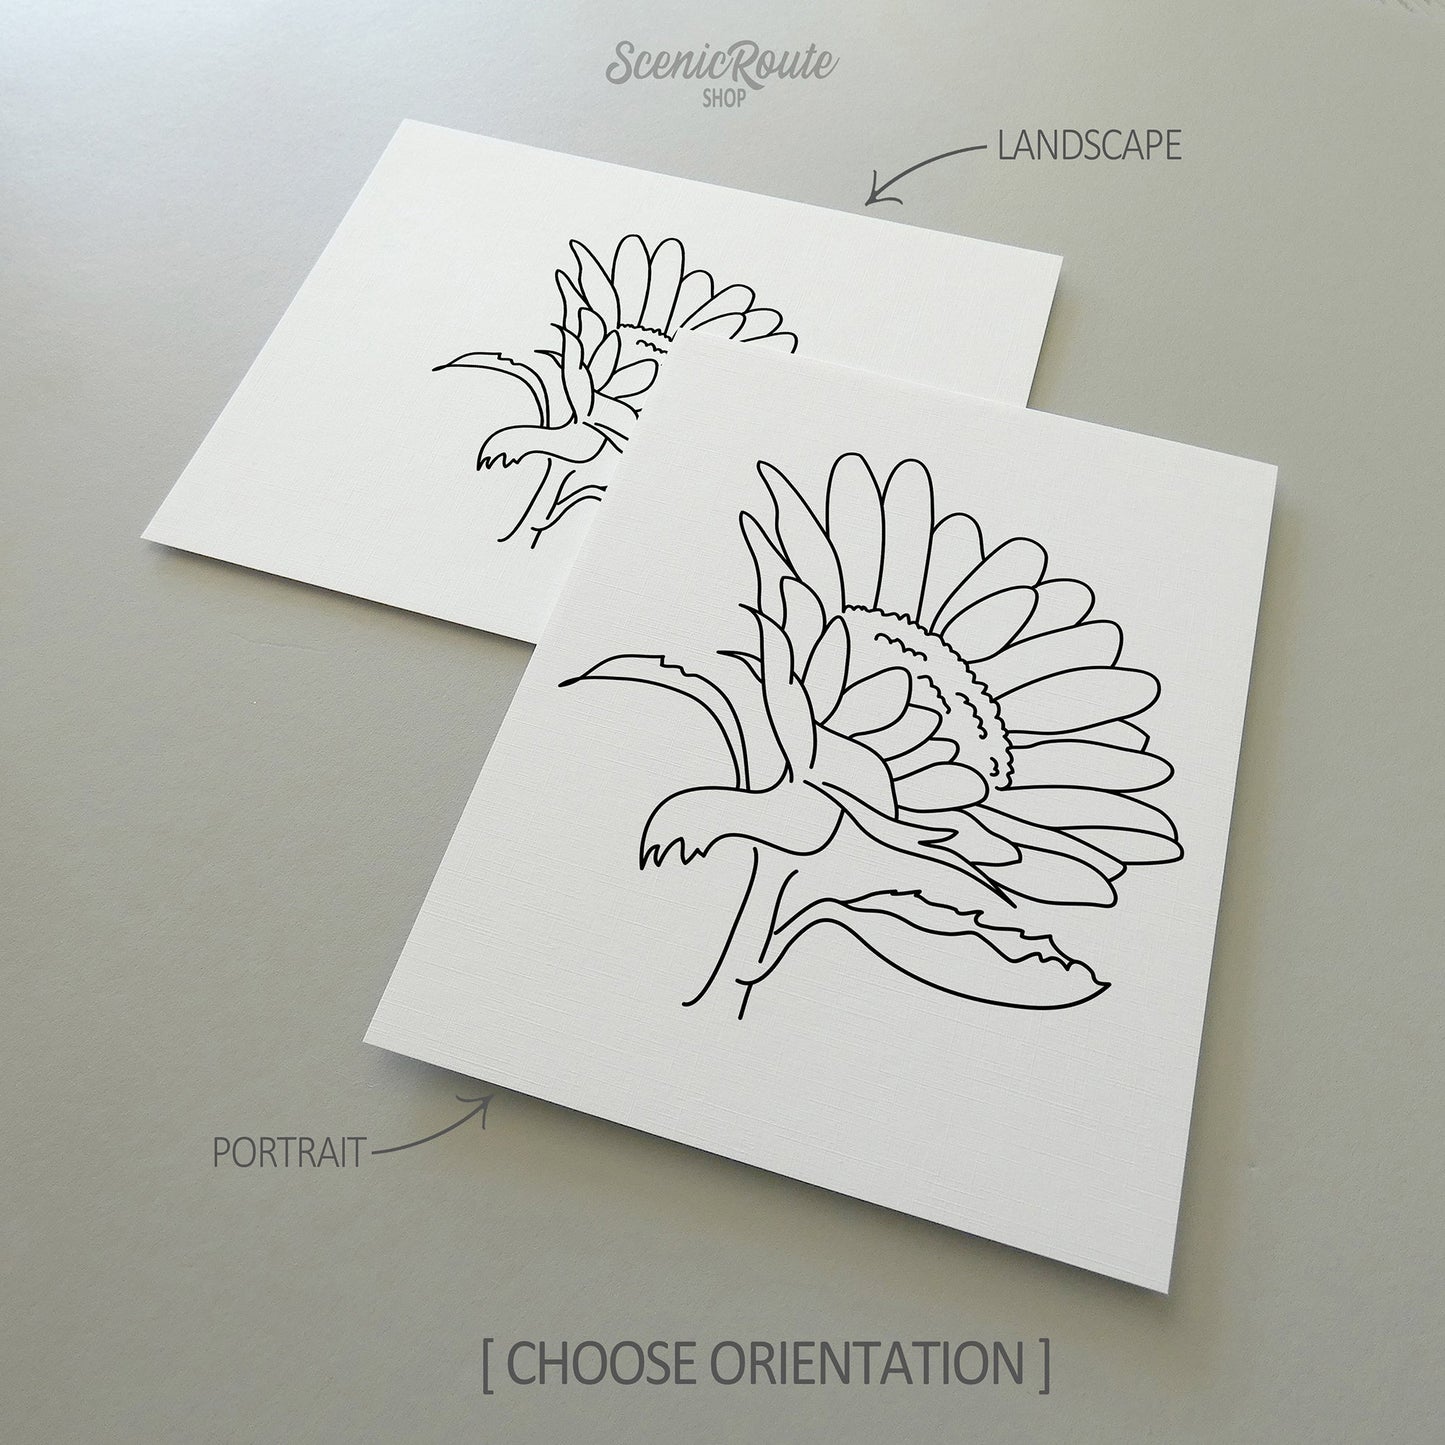 Two line art drawings of a Sunflower Flower on white linen paper with a gray background.  The pieces are shown in portrait and landscape orientation for the available art print options.